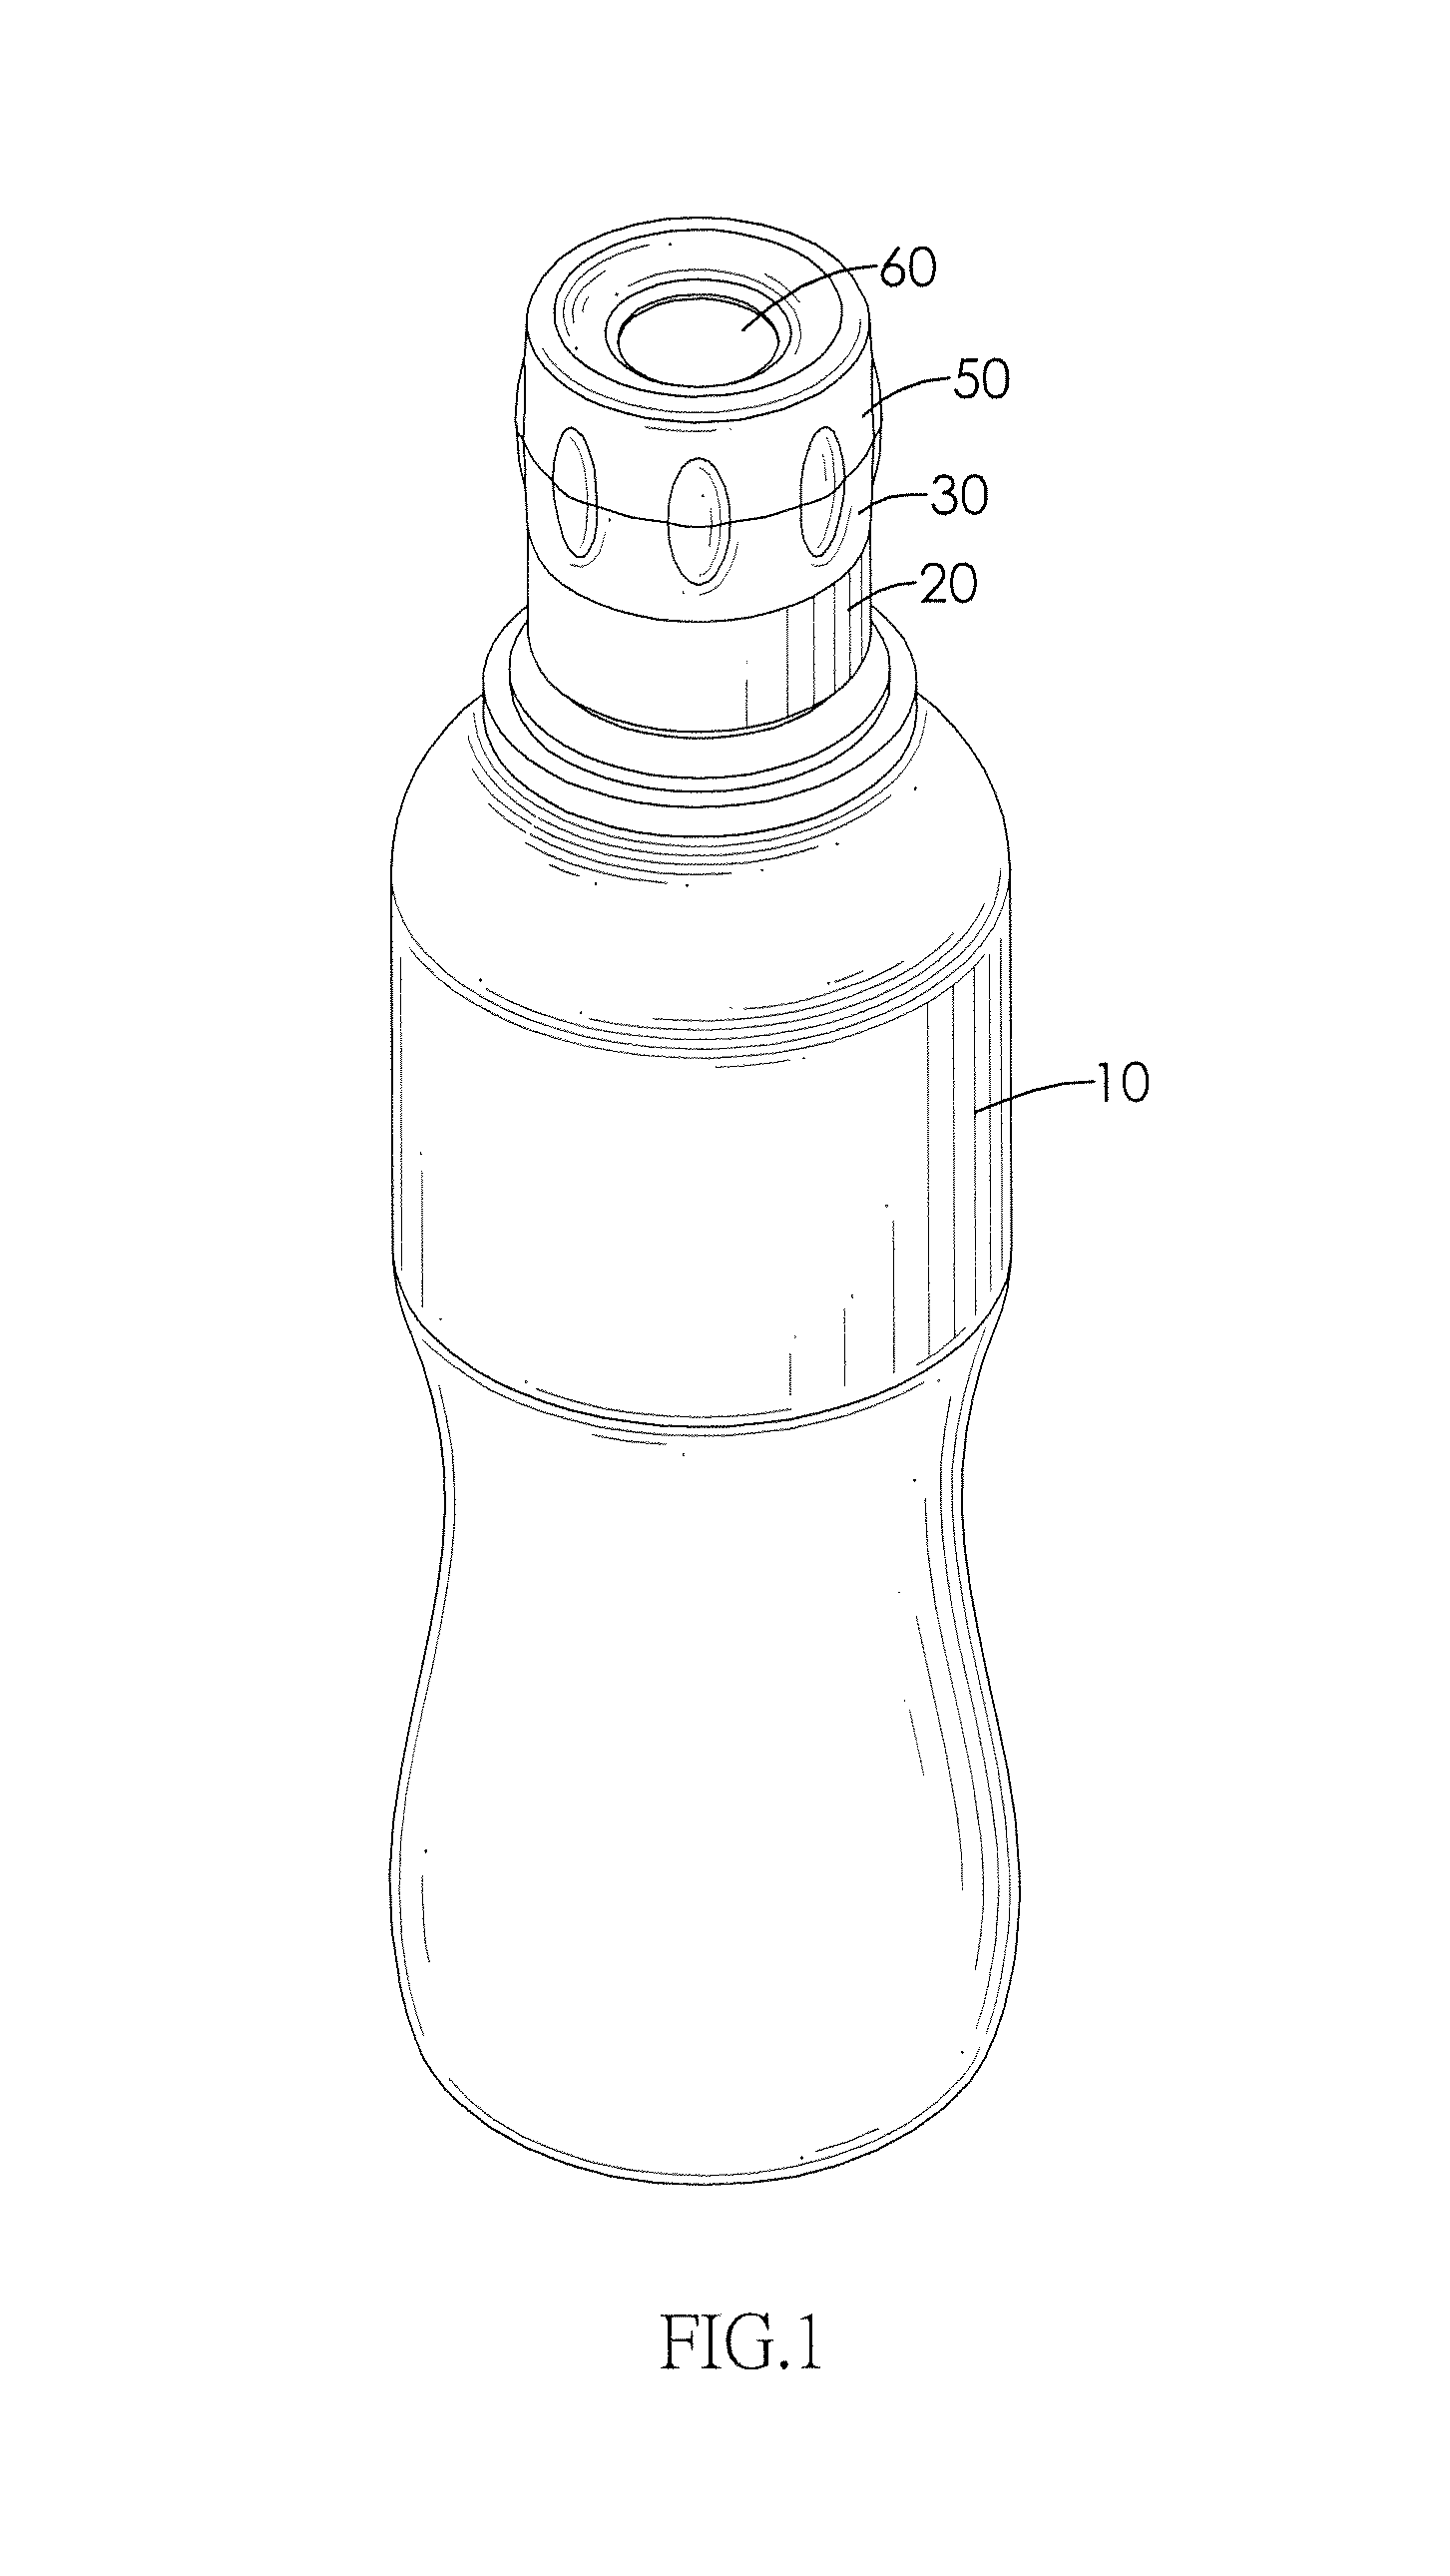 Lighting device having at least one water-activated battery mounted between a bottle cap and a bottle